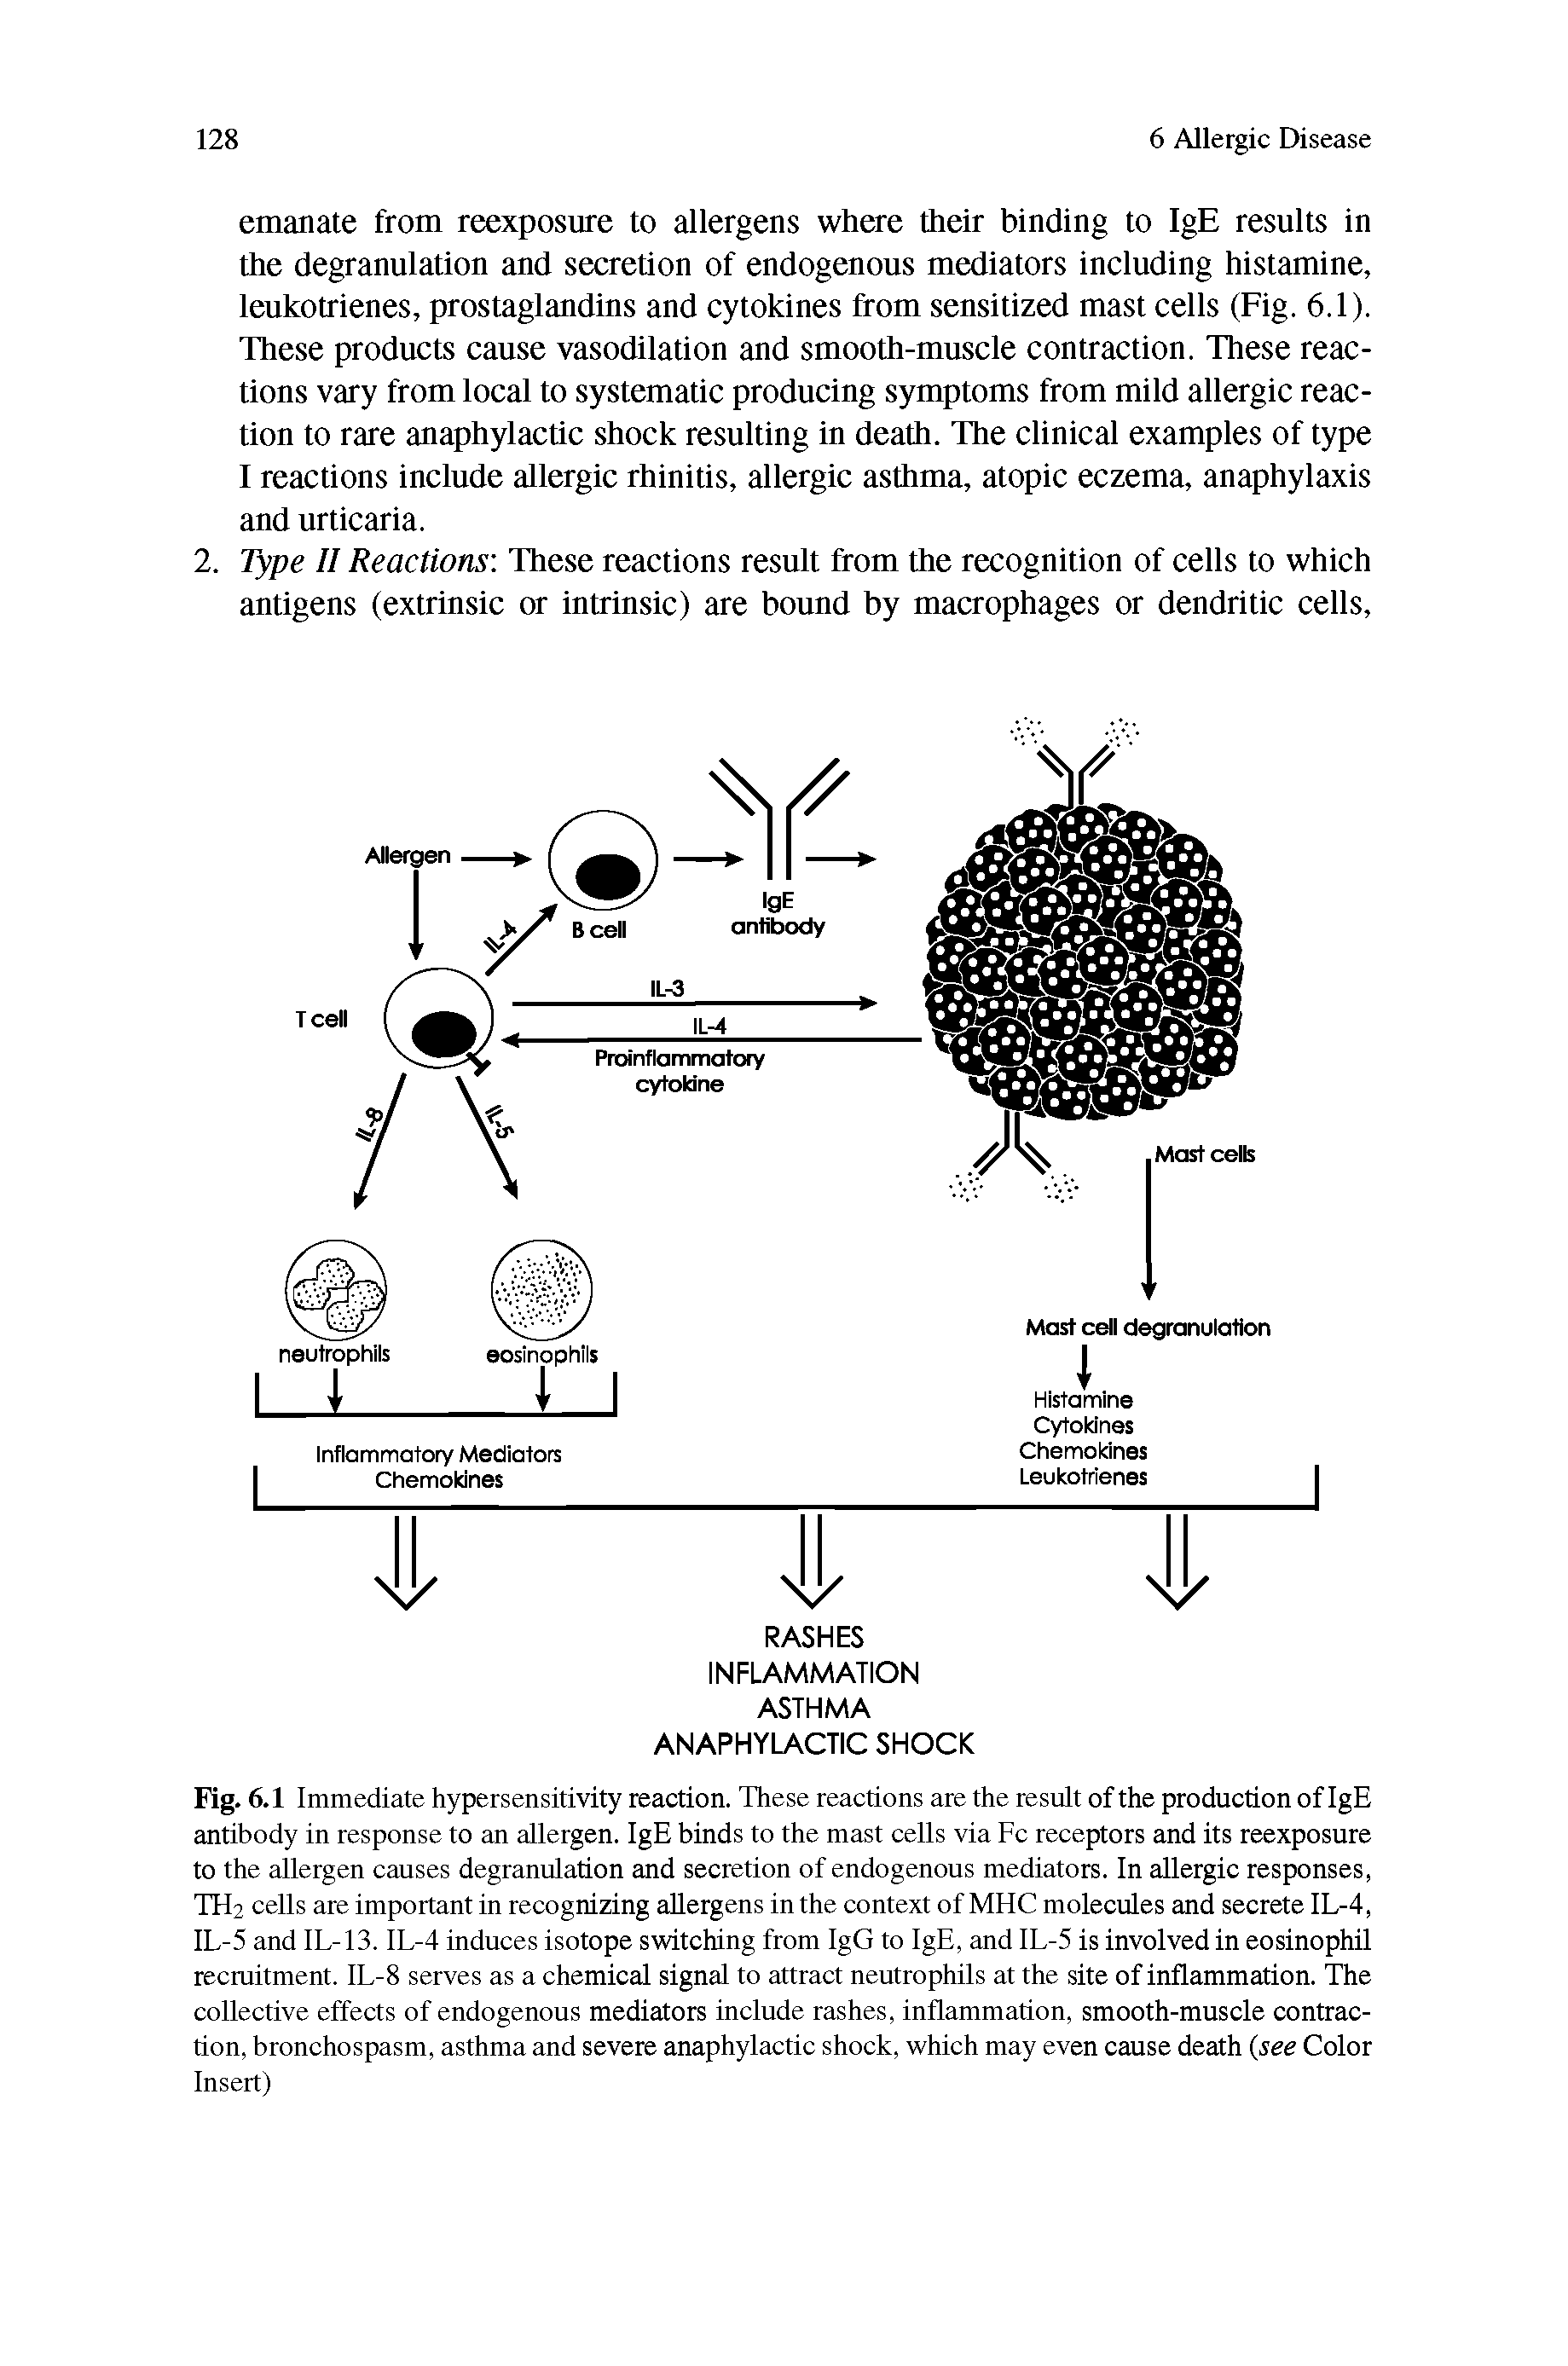 Fig. 6.1 Immediate hypersensitivity reaction. These reactions are the result of the production of IgE antibody in response to an allergen. IgE binds to the mast cells via Fc receptors and its reexposure to the allergen causes degranulation and secretion of endogenous mediators. In allergic responses, TH2 cells are important in recognizing allergens in the context of MHC molecules and secrete IL-4, IL-5 and IL-13. IL-4 induces isotope switching from IgG to IgE, and IL-5 is involved in eosinophil recruitment. IL-8 serves as a chemical signal to attract neutrophils at the site of inflammation. The collective effects of endogenous mediators include rashes, inflammation, smooth-muscle contraction, bronchospasm, asthma and severe anaphylactic shock, which may even cause death (see Color Insert)...